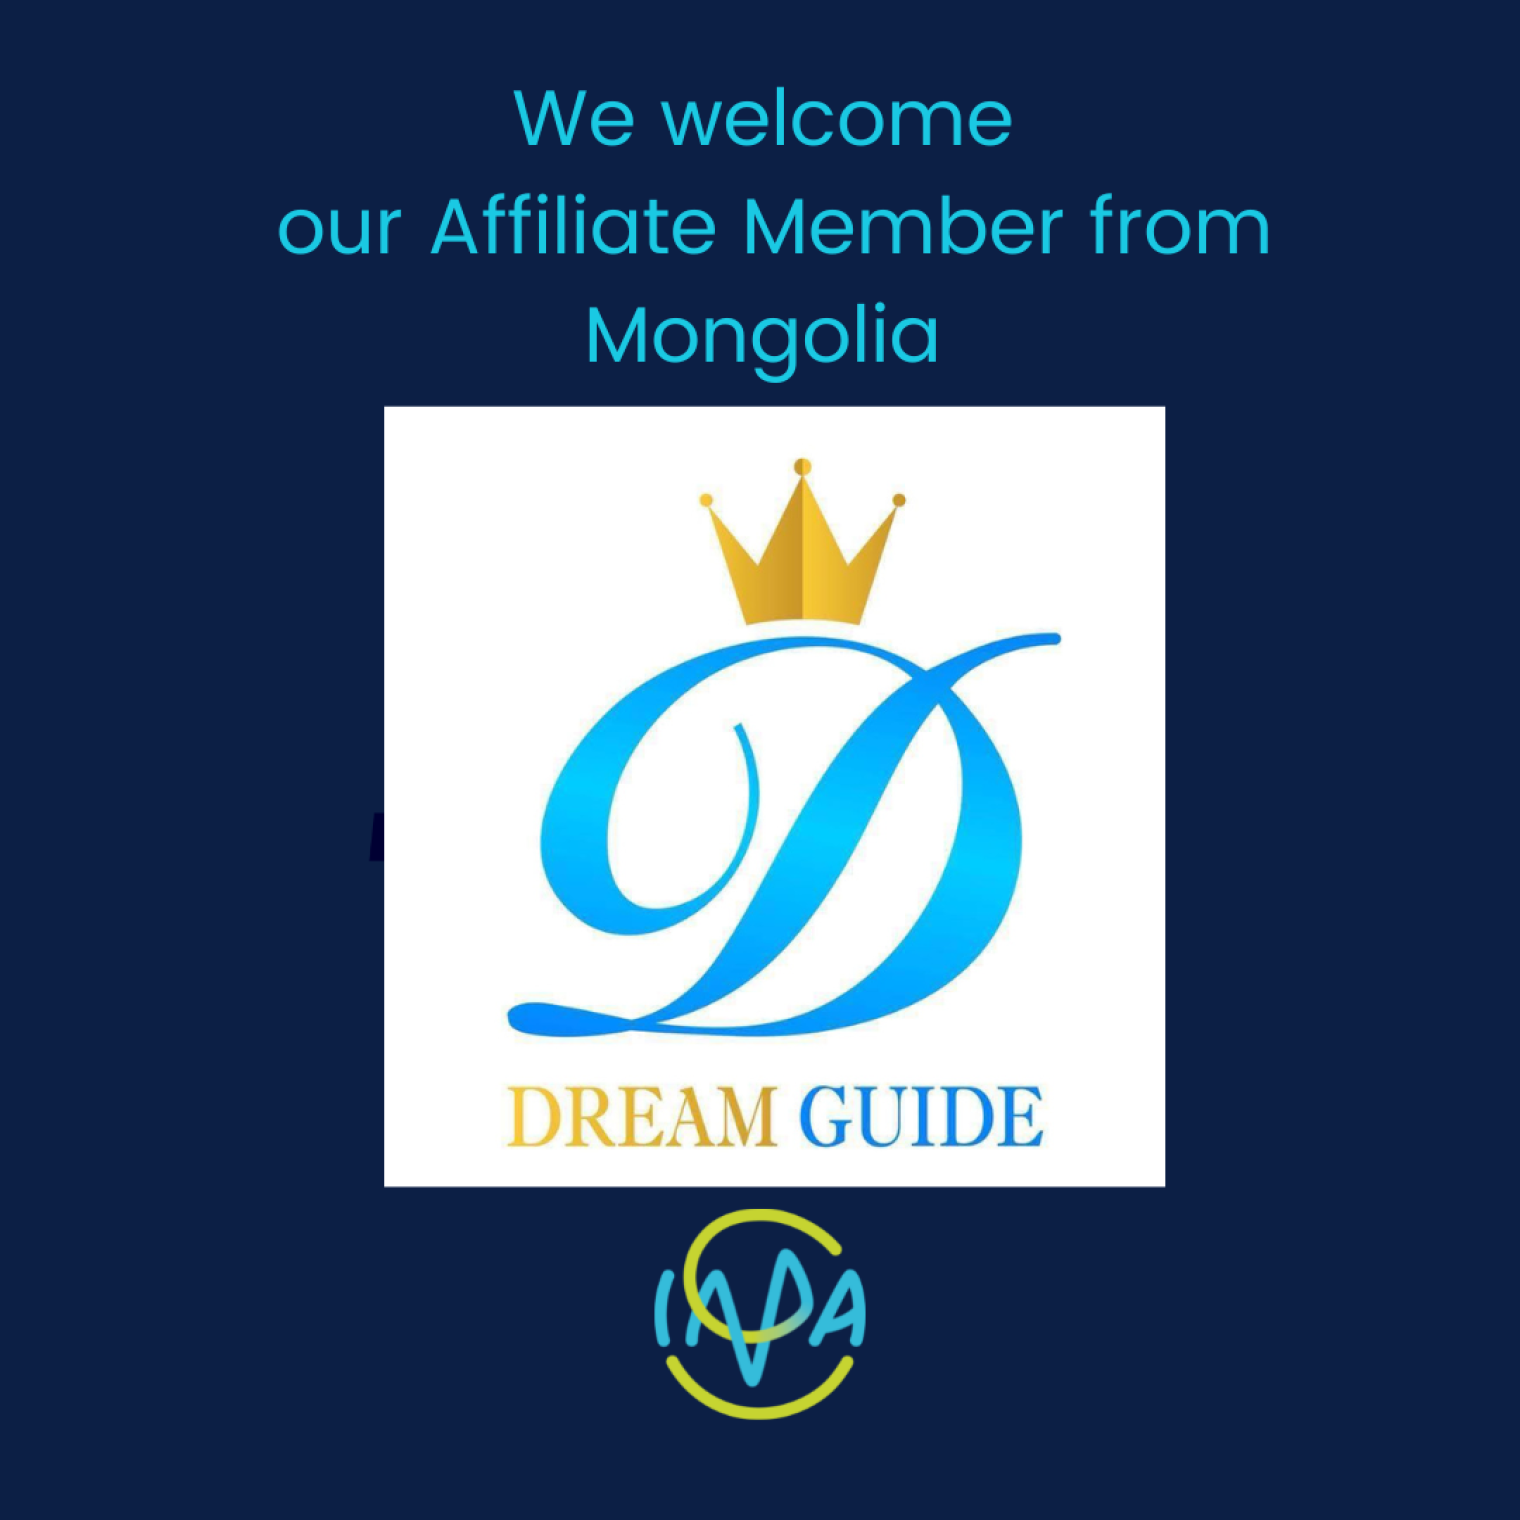 Welcome to our new Affiliate Member Dream Guide LLC, Mongolia